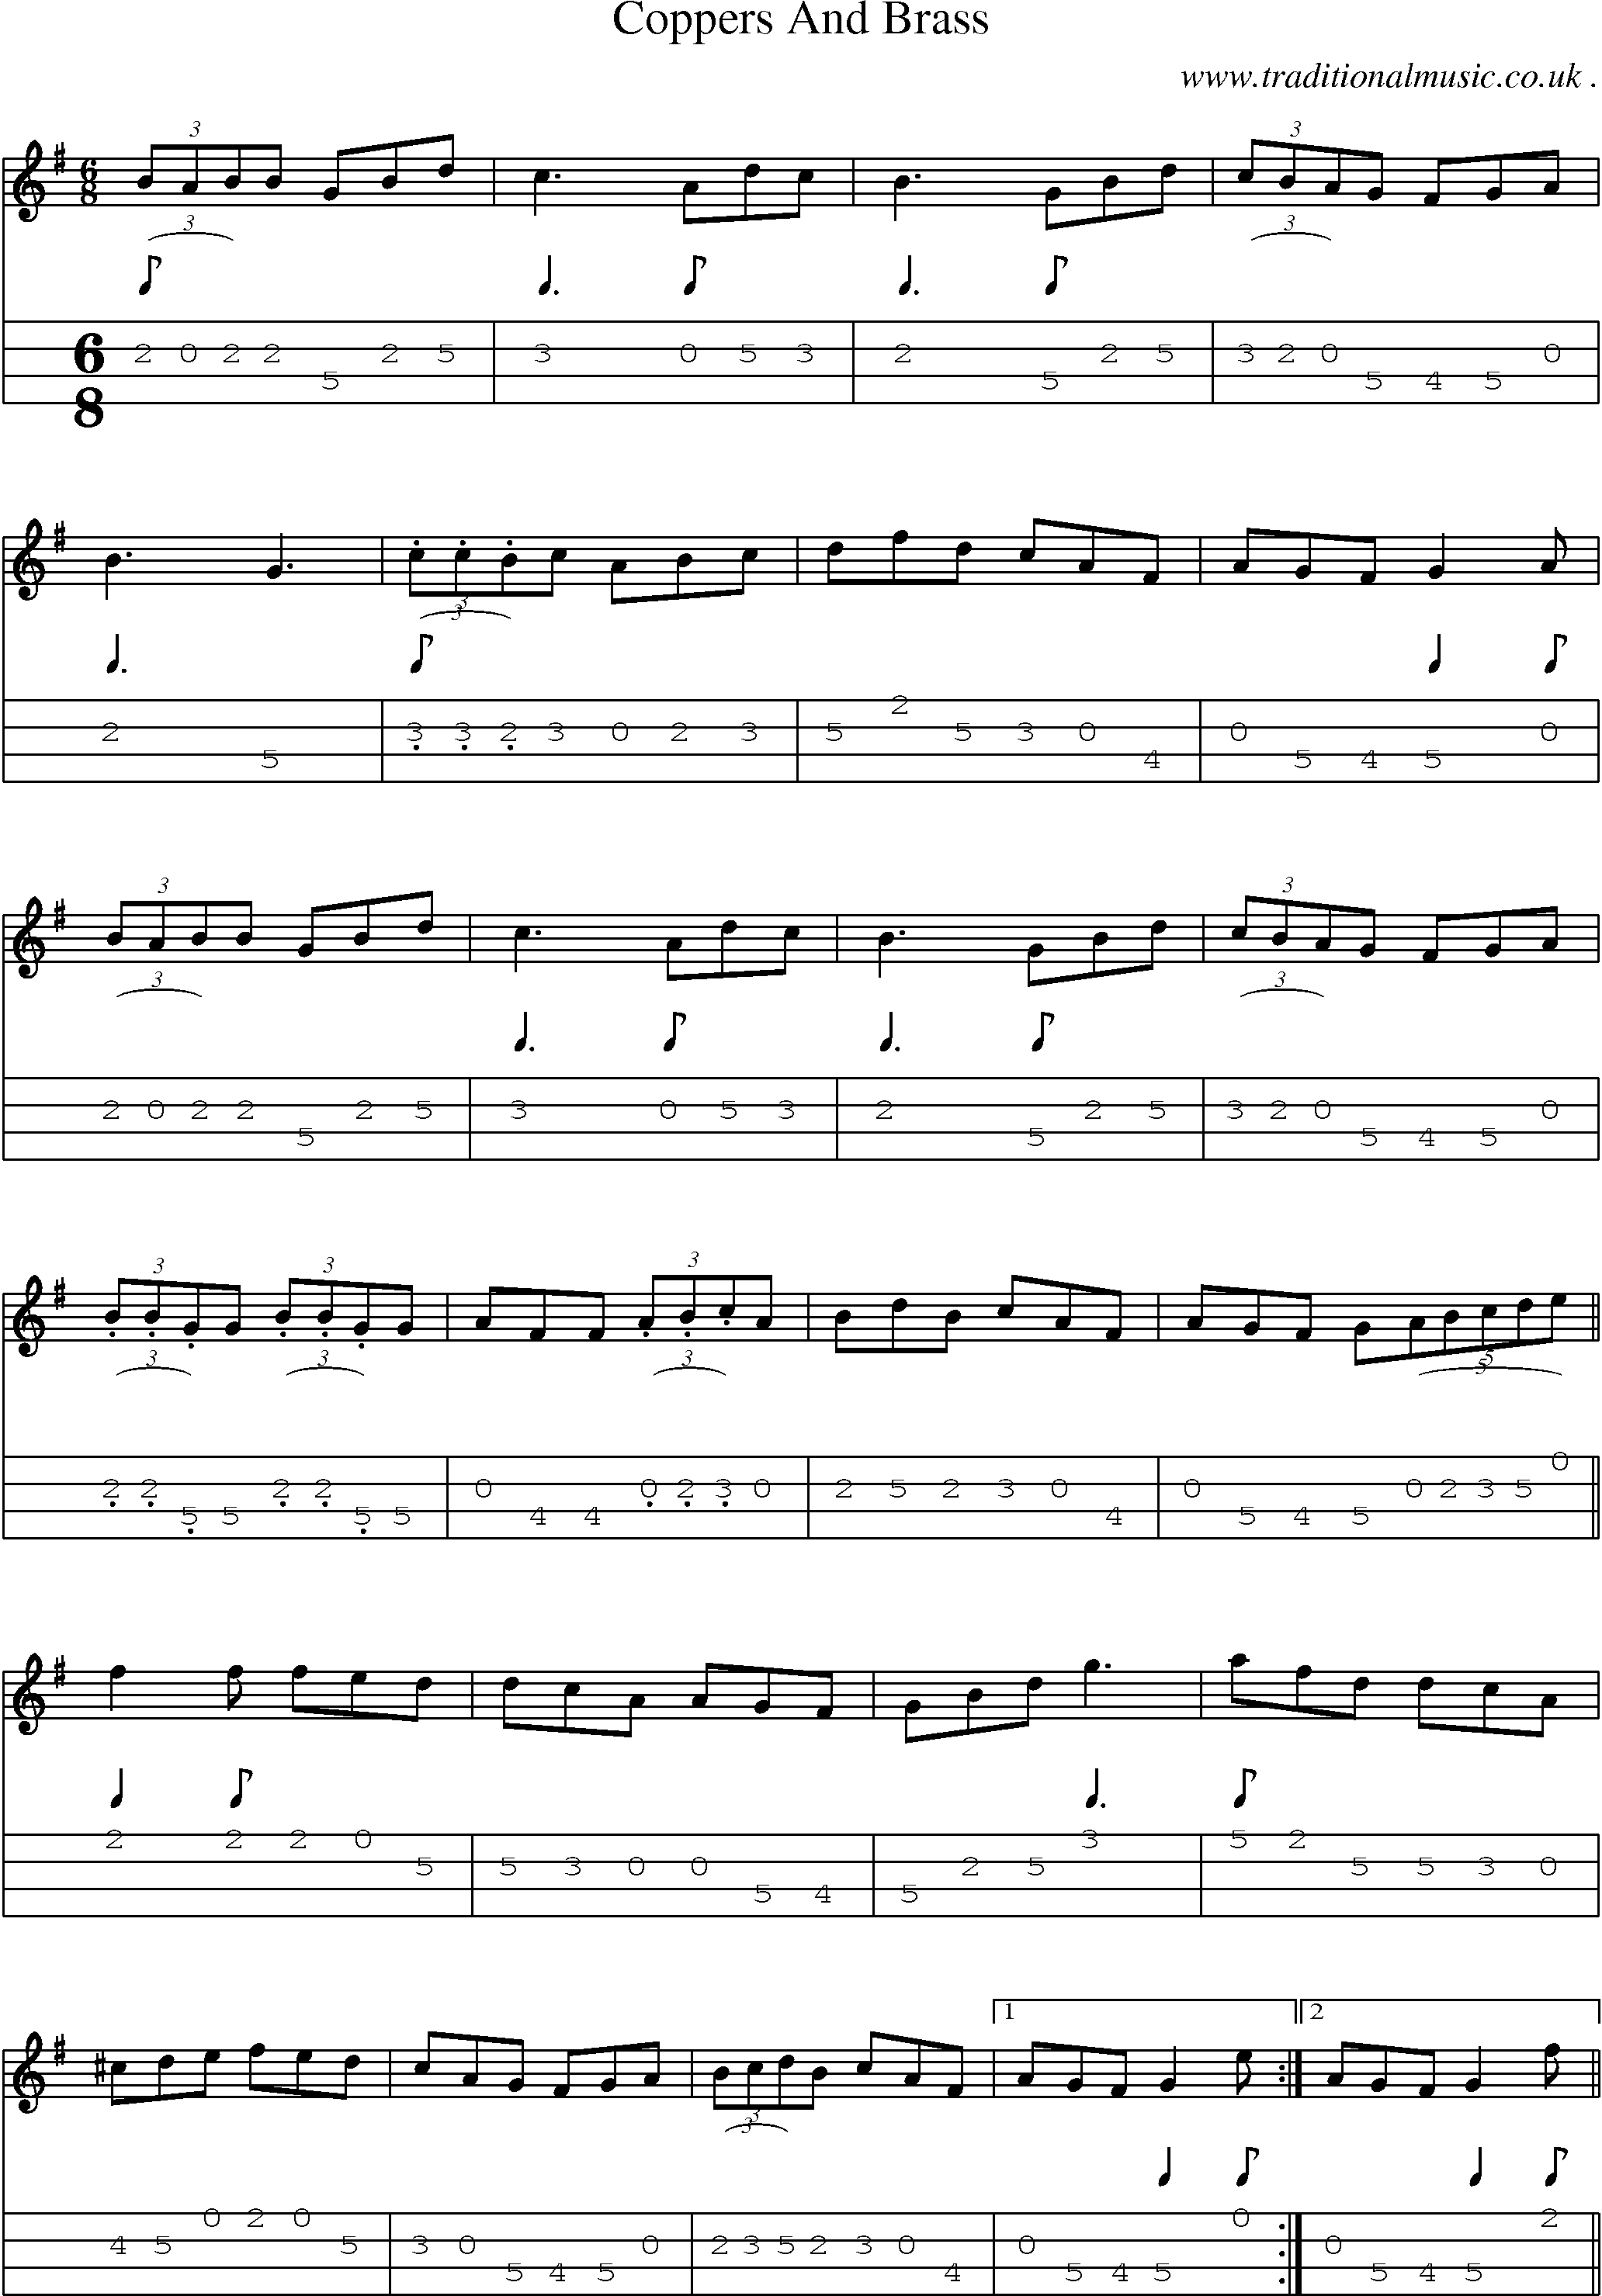 Sheet-Music and Mandolin Tabs for Coppers And Brass